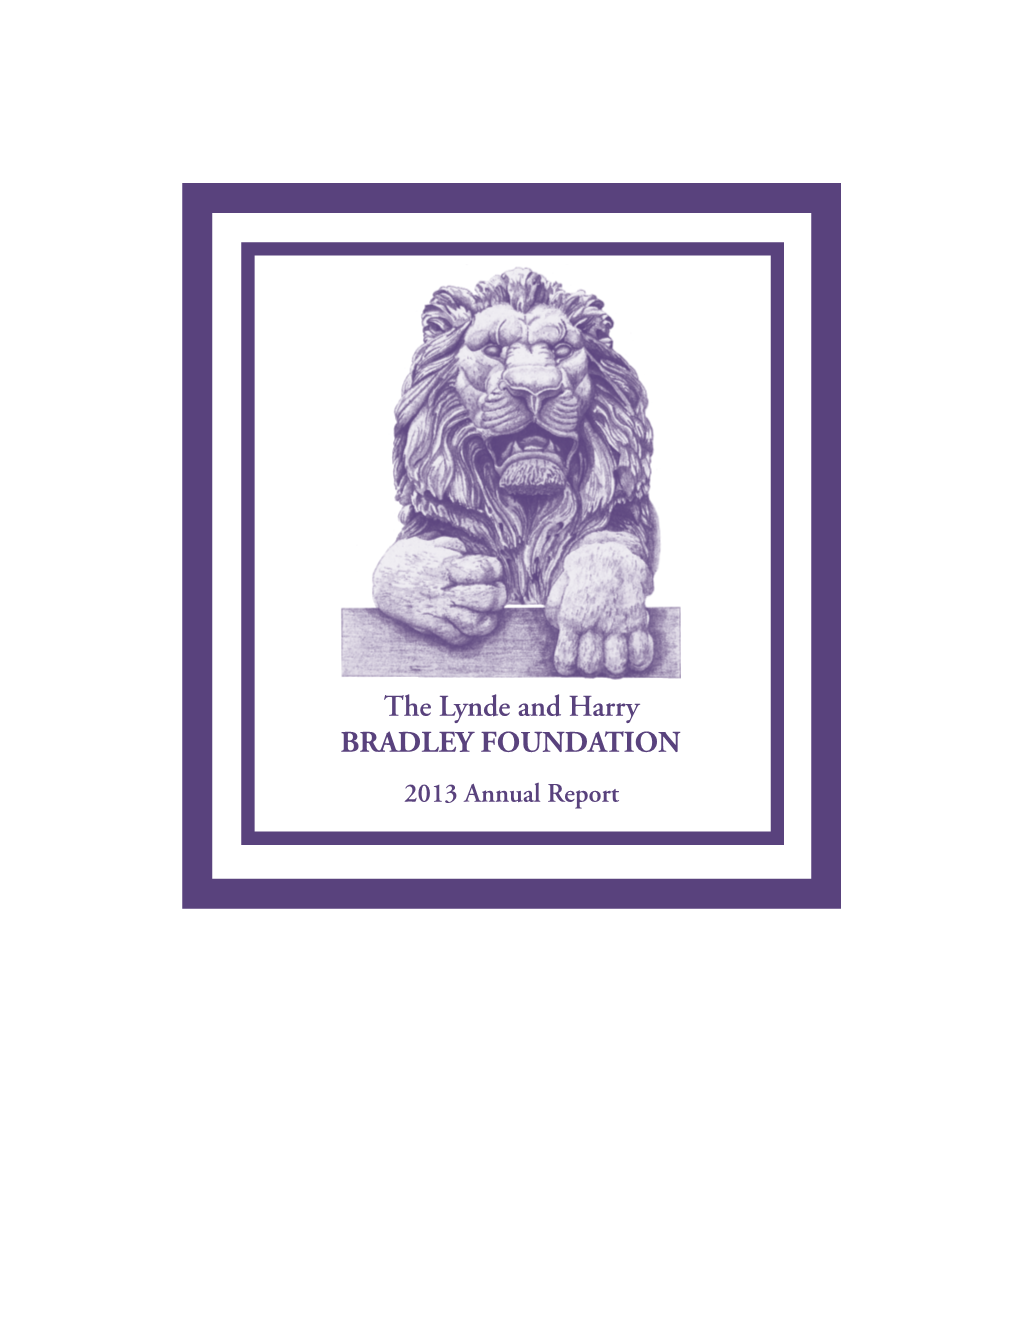 The Lynde and Harry BRADLEY FOUNDATION 2013 Annual Report